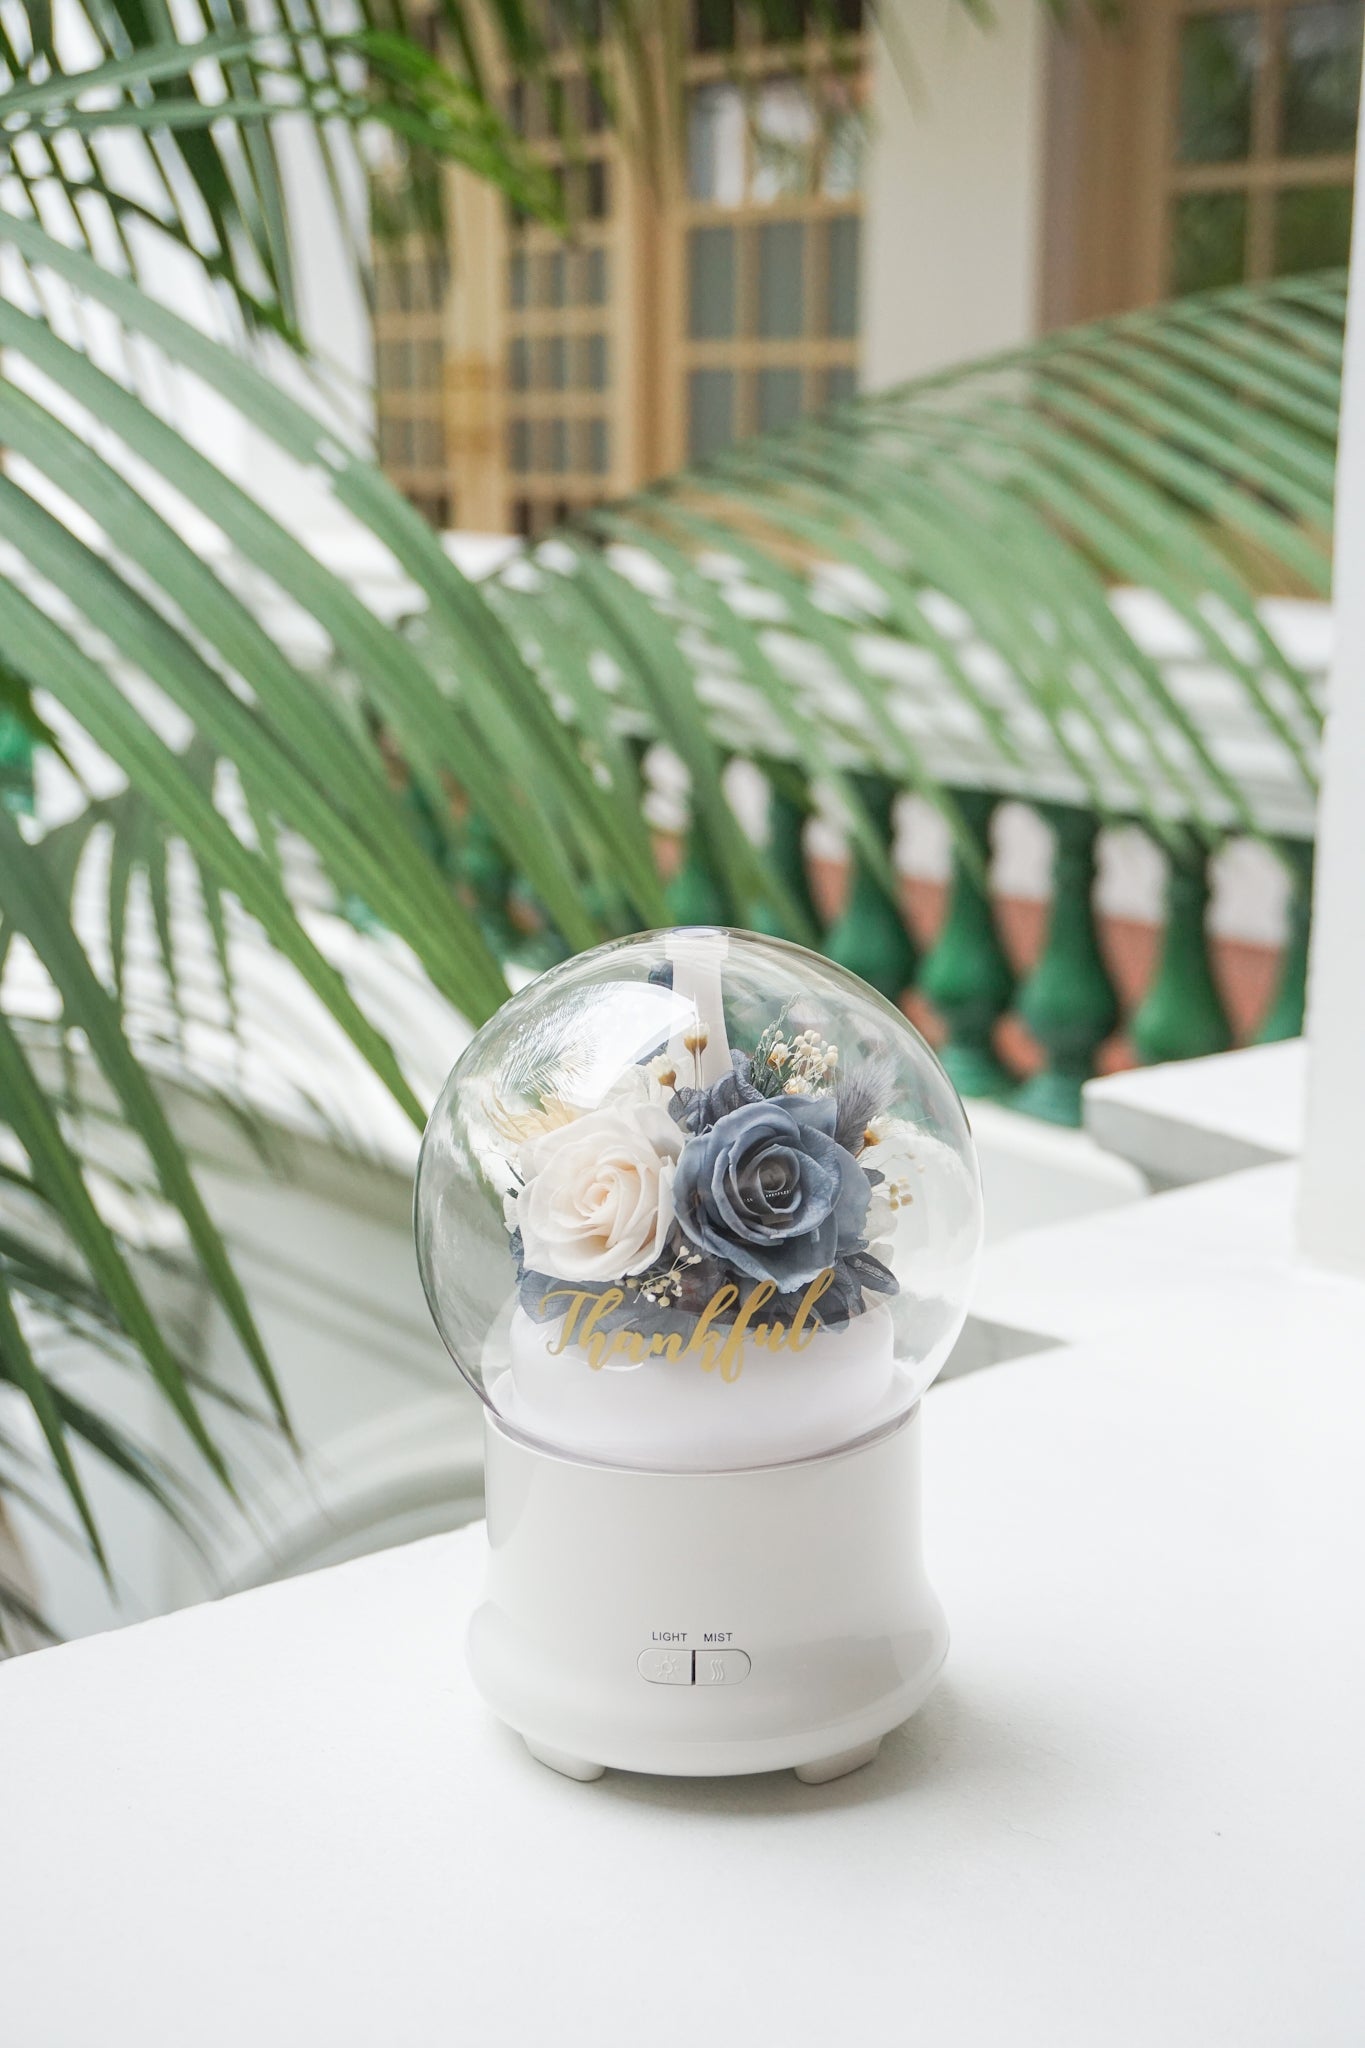 Customised Aroma Diffuser/Humidifier with Blue-Cream Preserved Flowers, Light and Mist